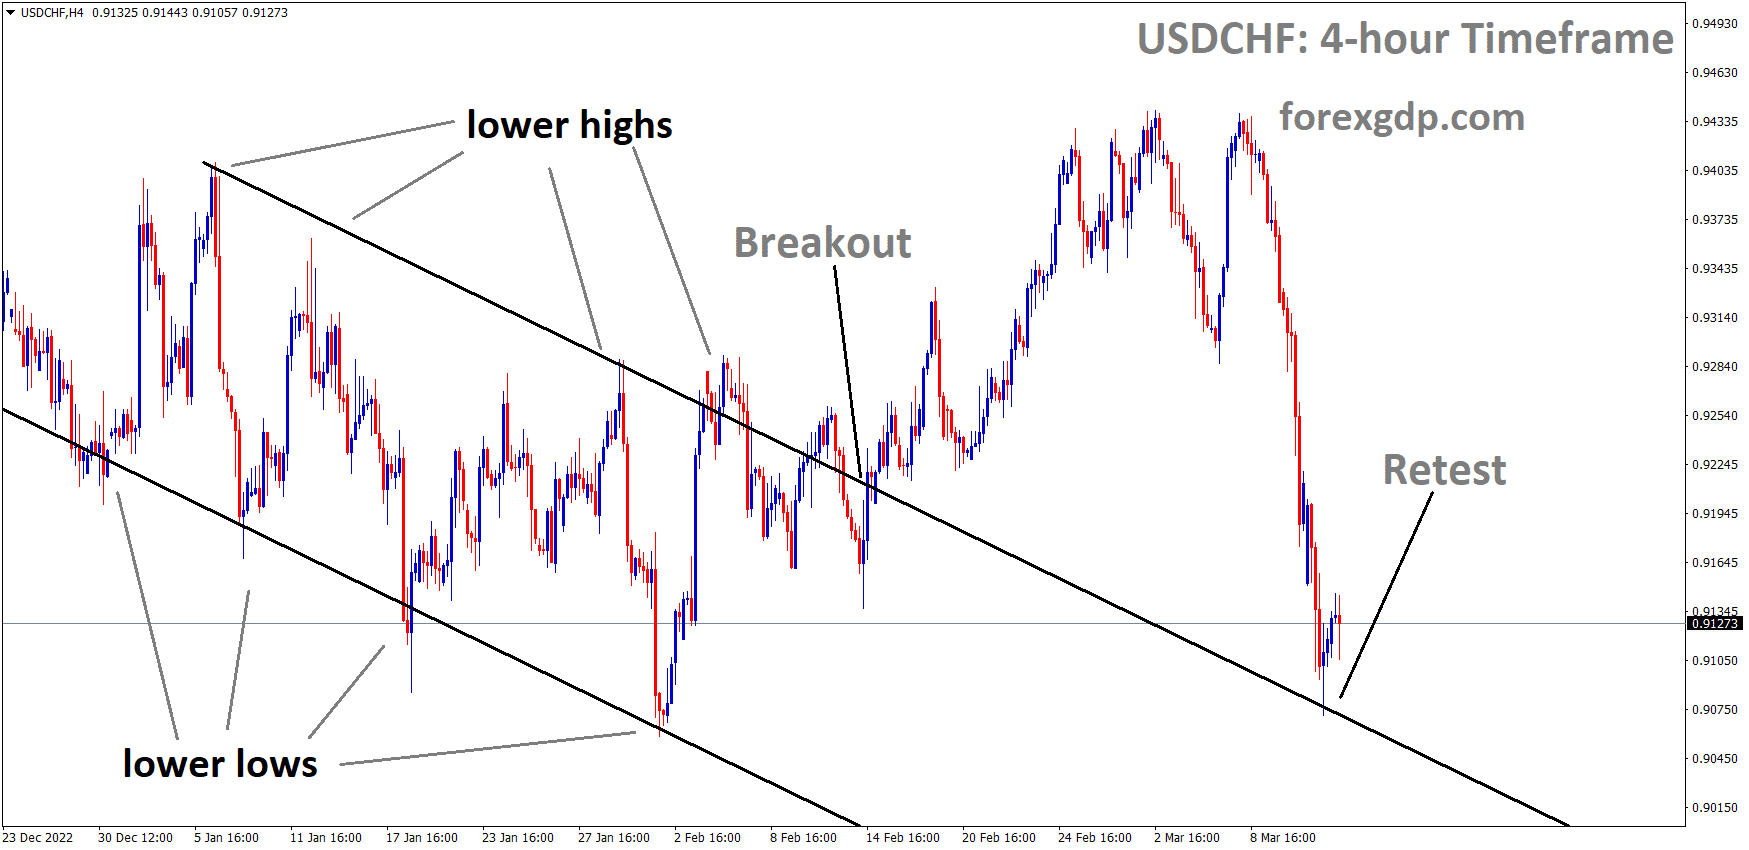 USDCHF has broken the Descending channel and the market has retested the broken area of the channel 1